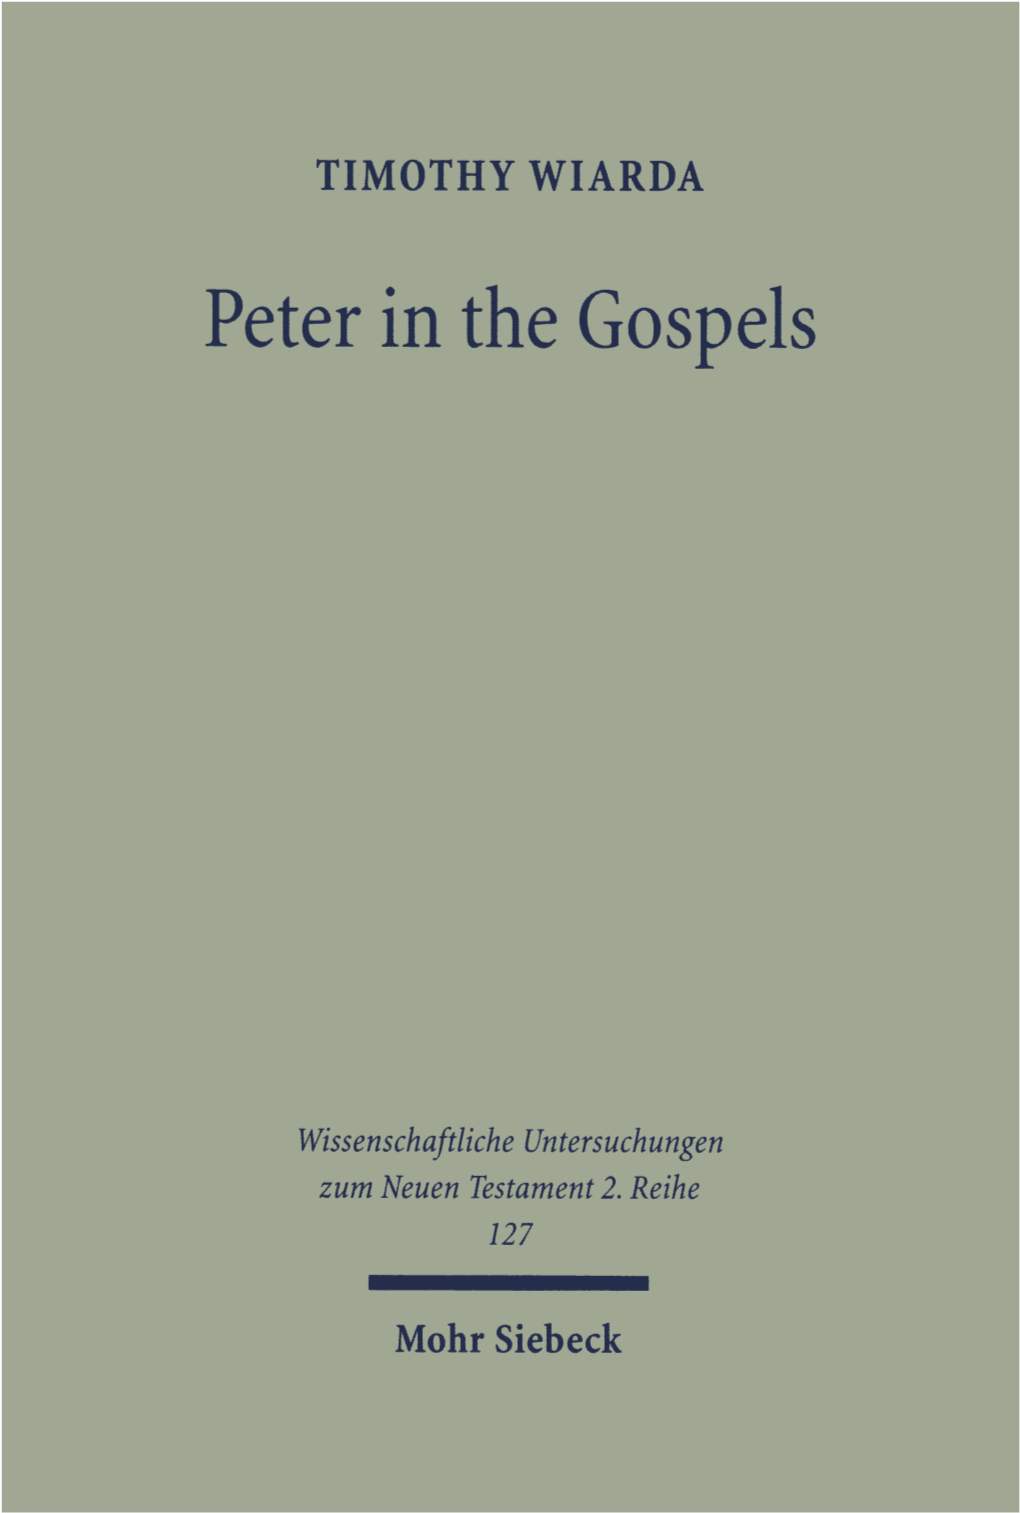 Peter in the Gospels. Pattern, Personality and Relationship